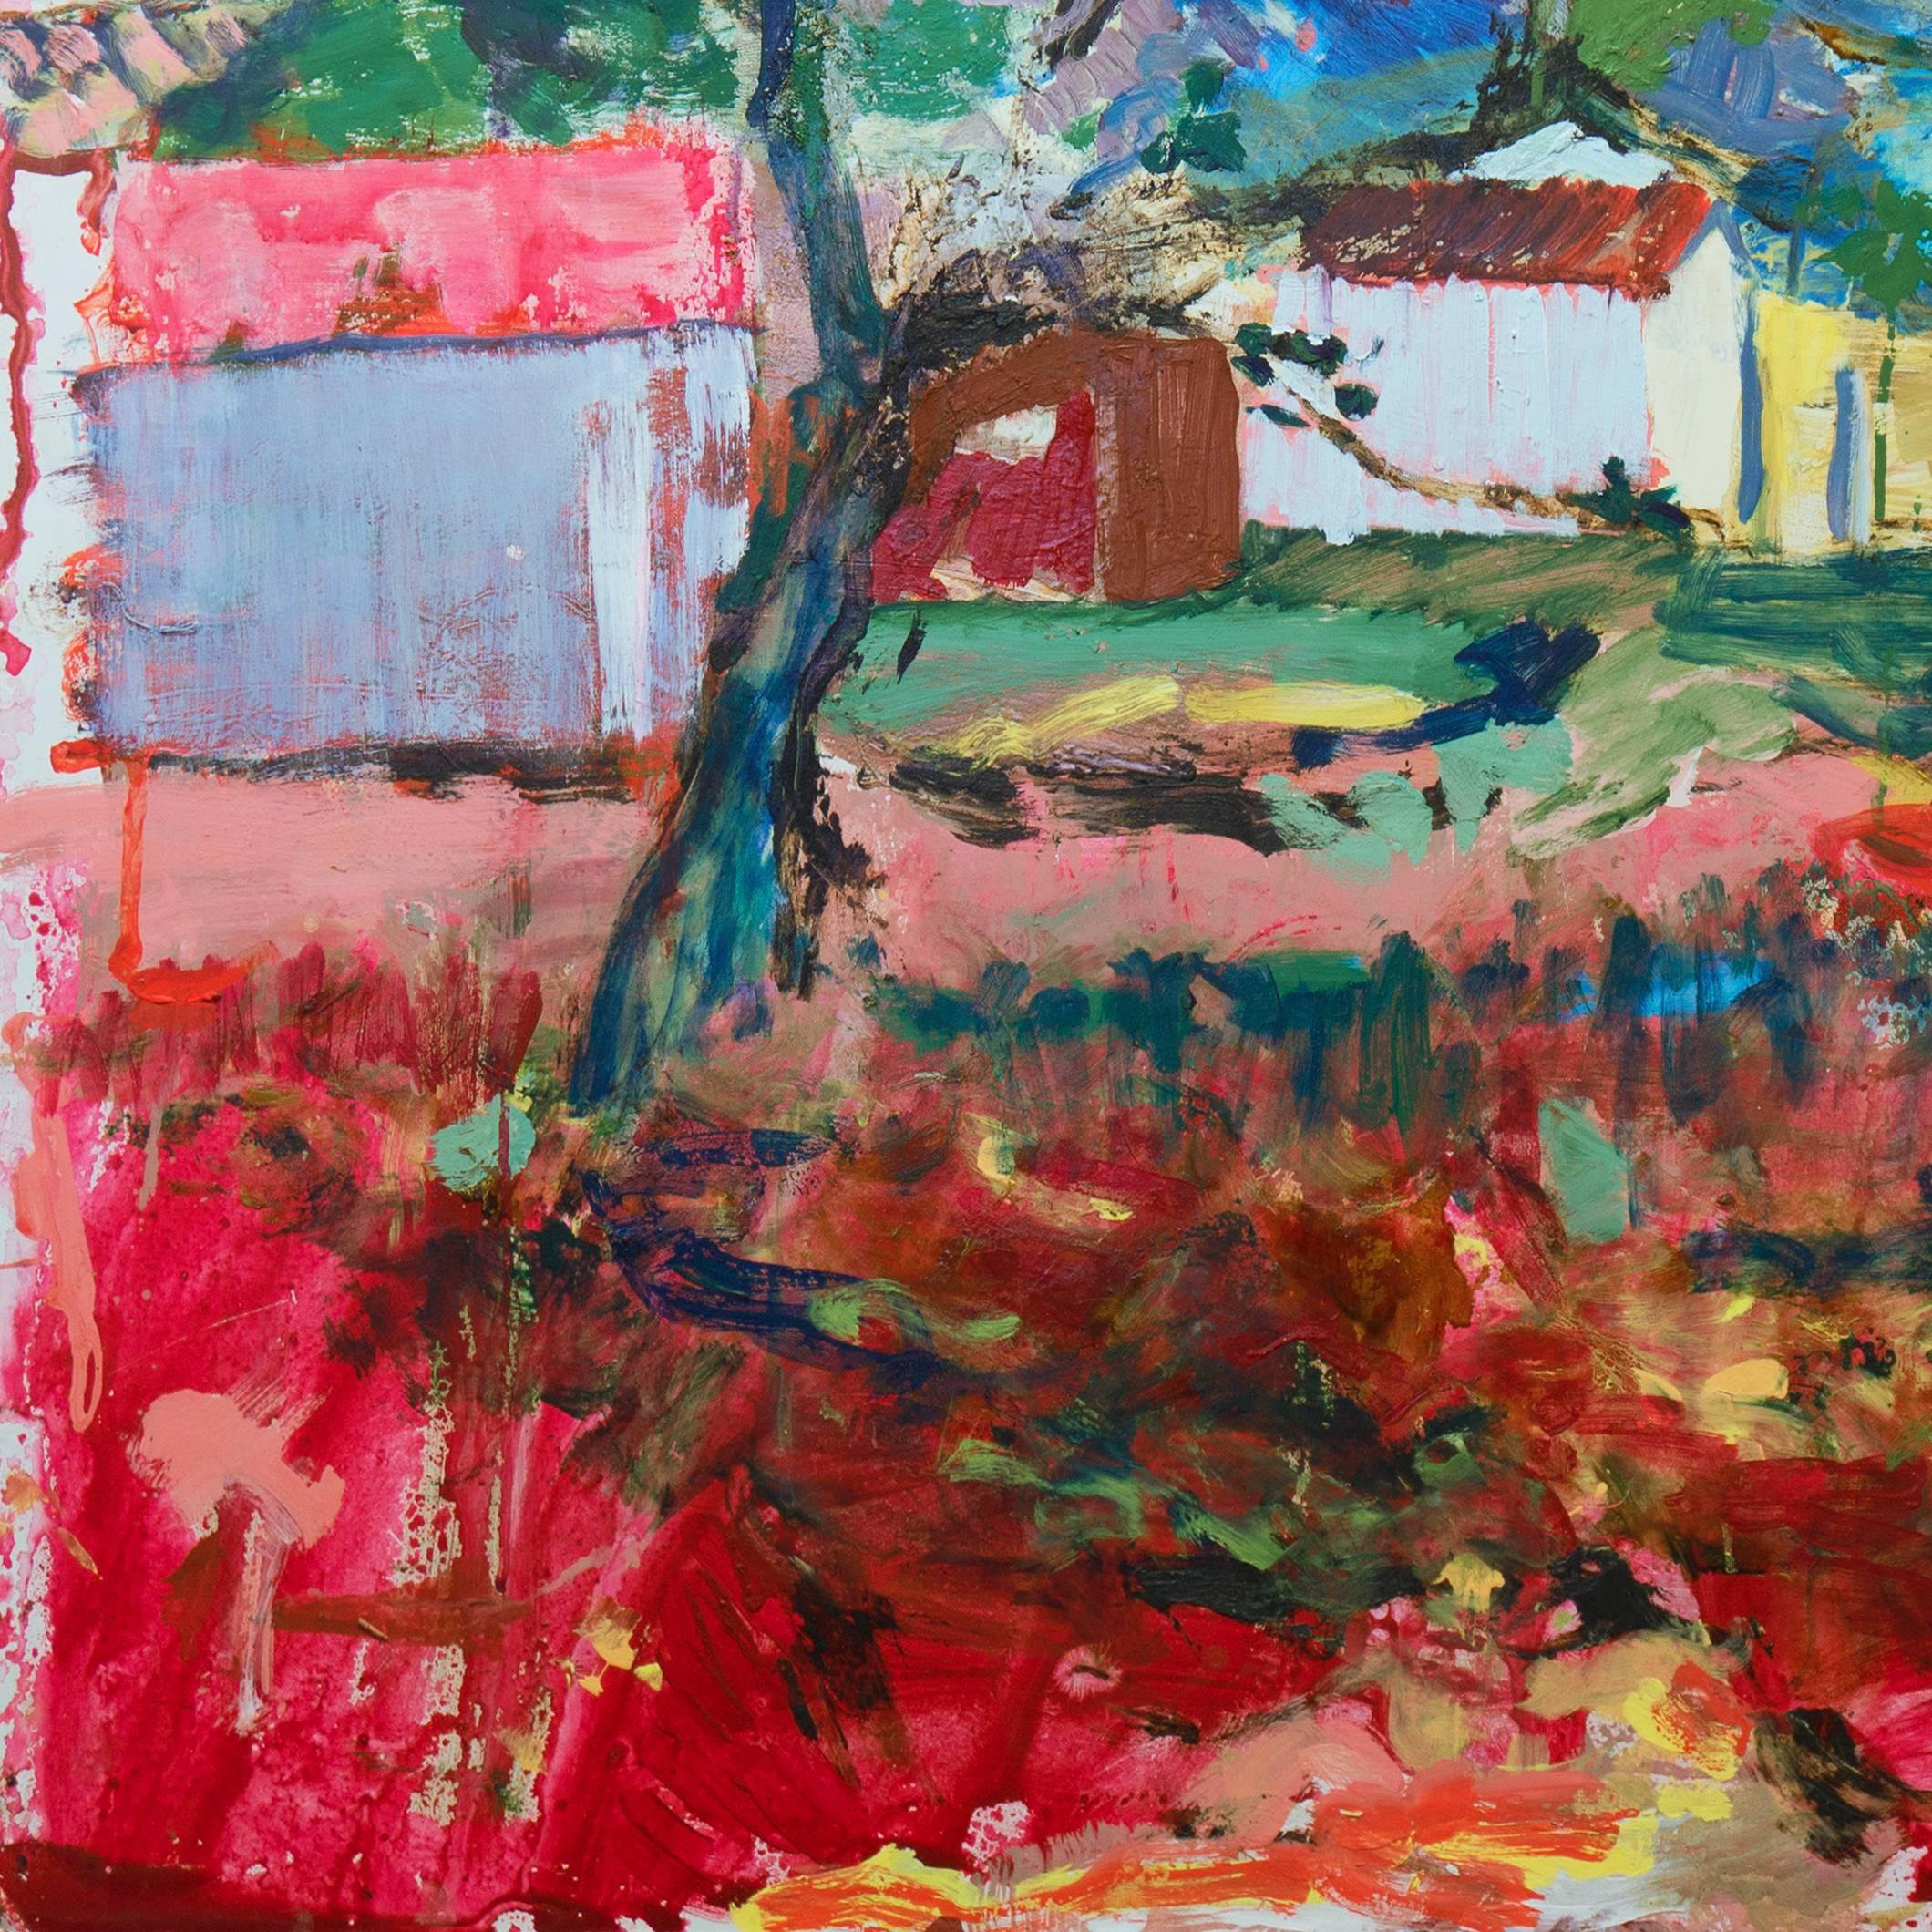 Signed lower right, 'Canete', for Robert Canete (American, born 1956) and painted in 2010; additionally signed and titled verso.

A substantial Post-Impressionist style oil landscape showing a view of old wooden farm-buildings at the edge of a lake